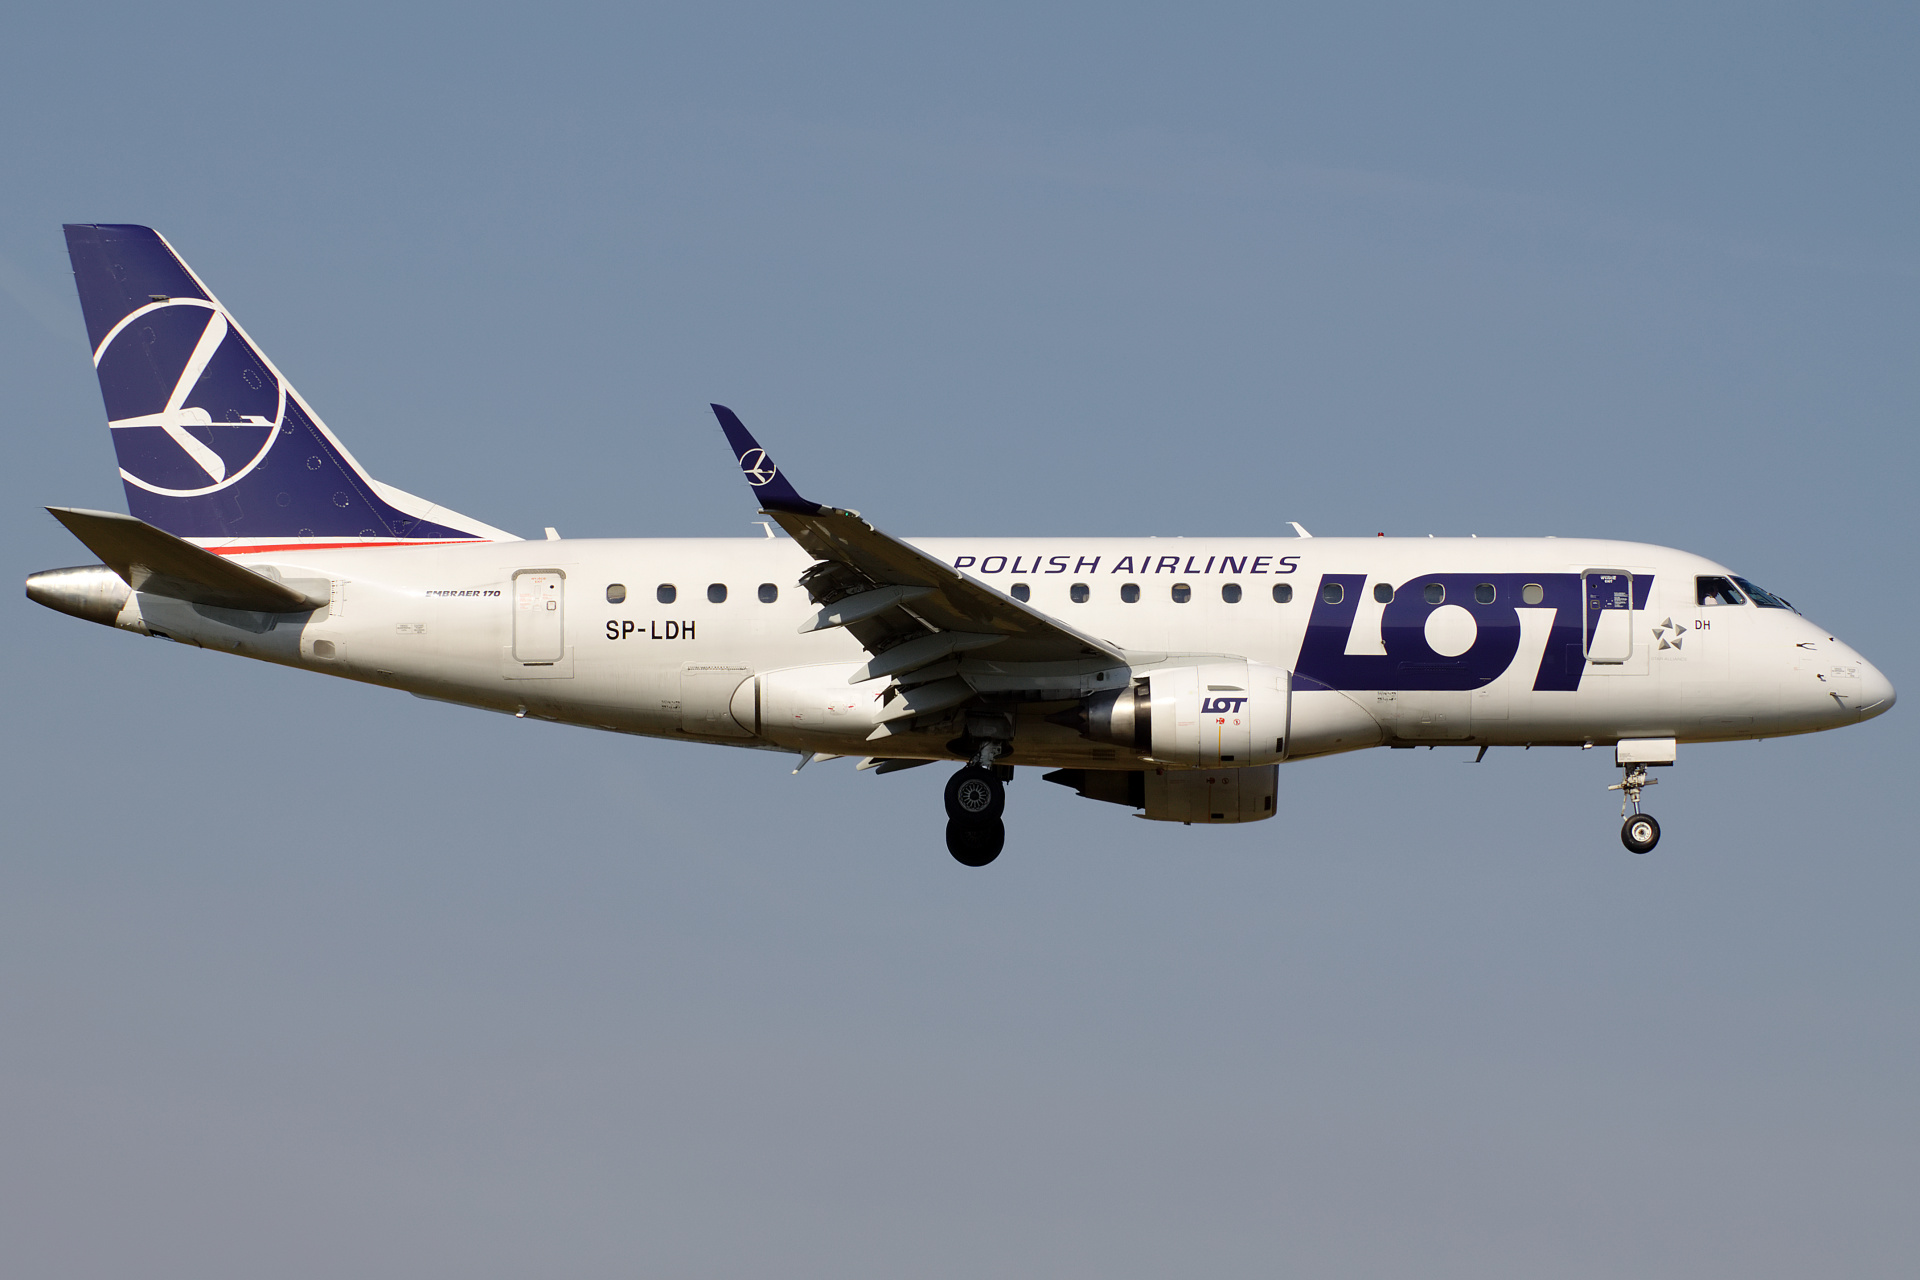 SP-LDH (new livery) (Aircraft » EPWA Spotting » Embraer E170 » LOT Polish Airlines)